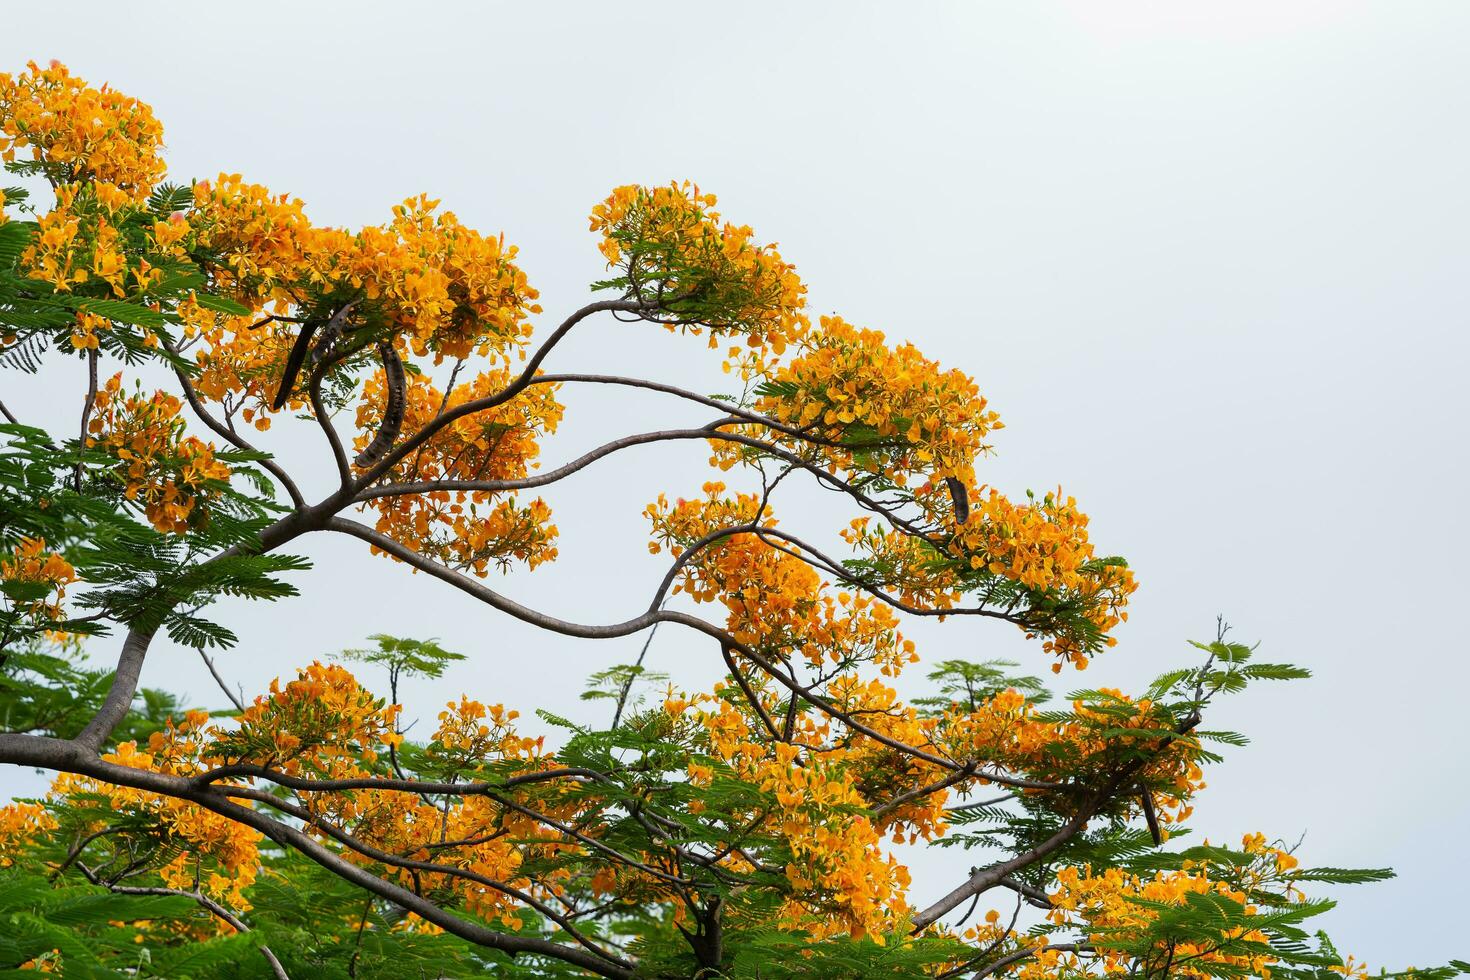 The Royal Poinciana tree has a common name in the Thai language. The flame is a large perennial plant. Deciduous in the dry season The crown is wide, the flowers are many, dark yellow, orange, red. photo